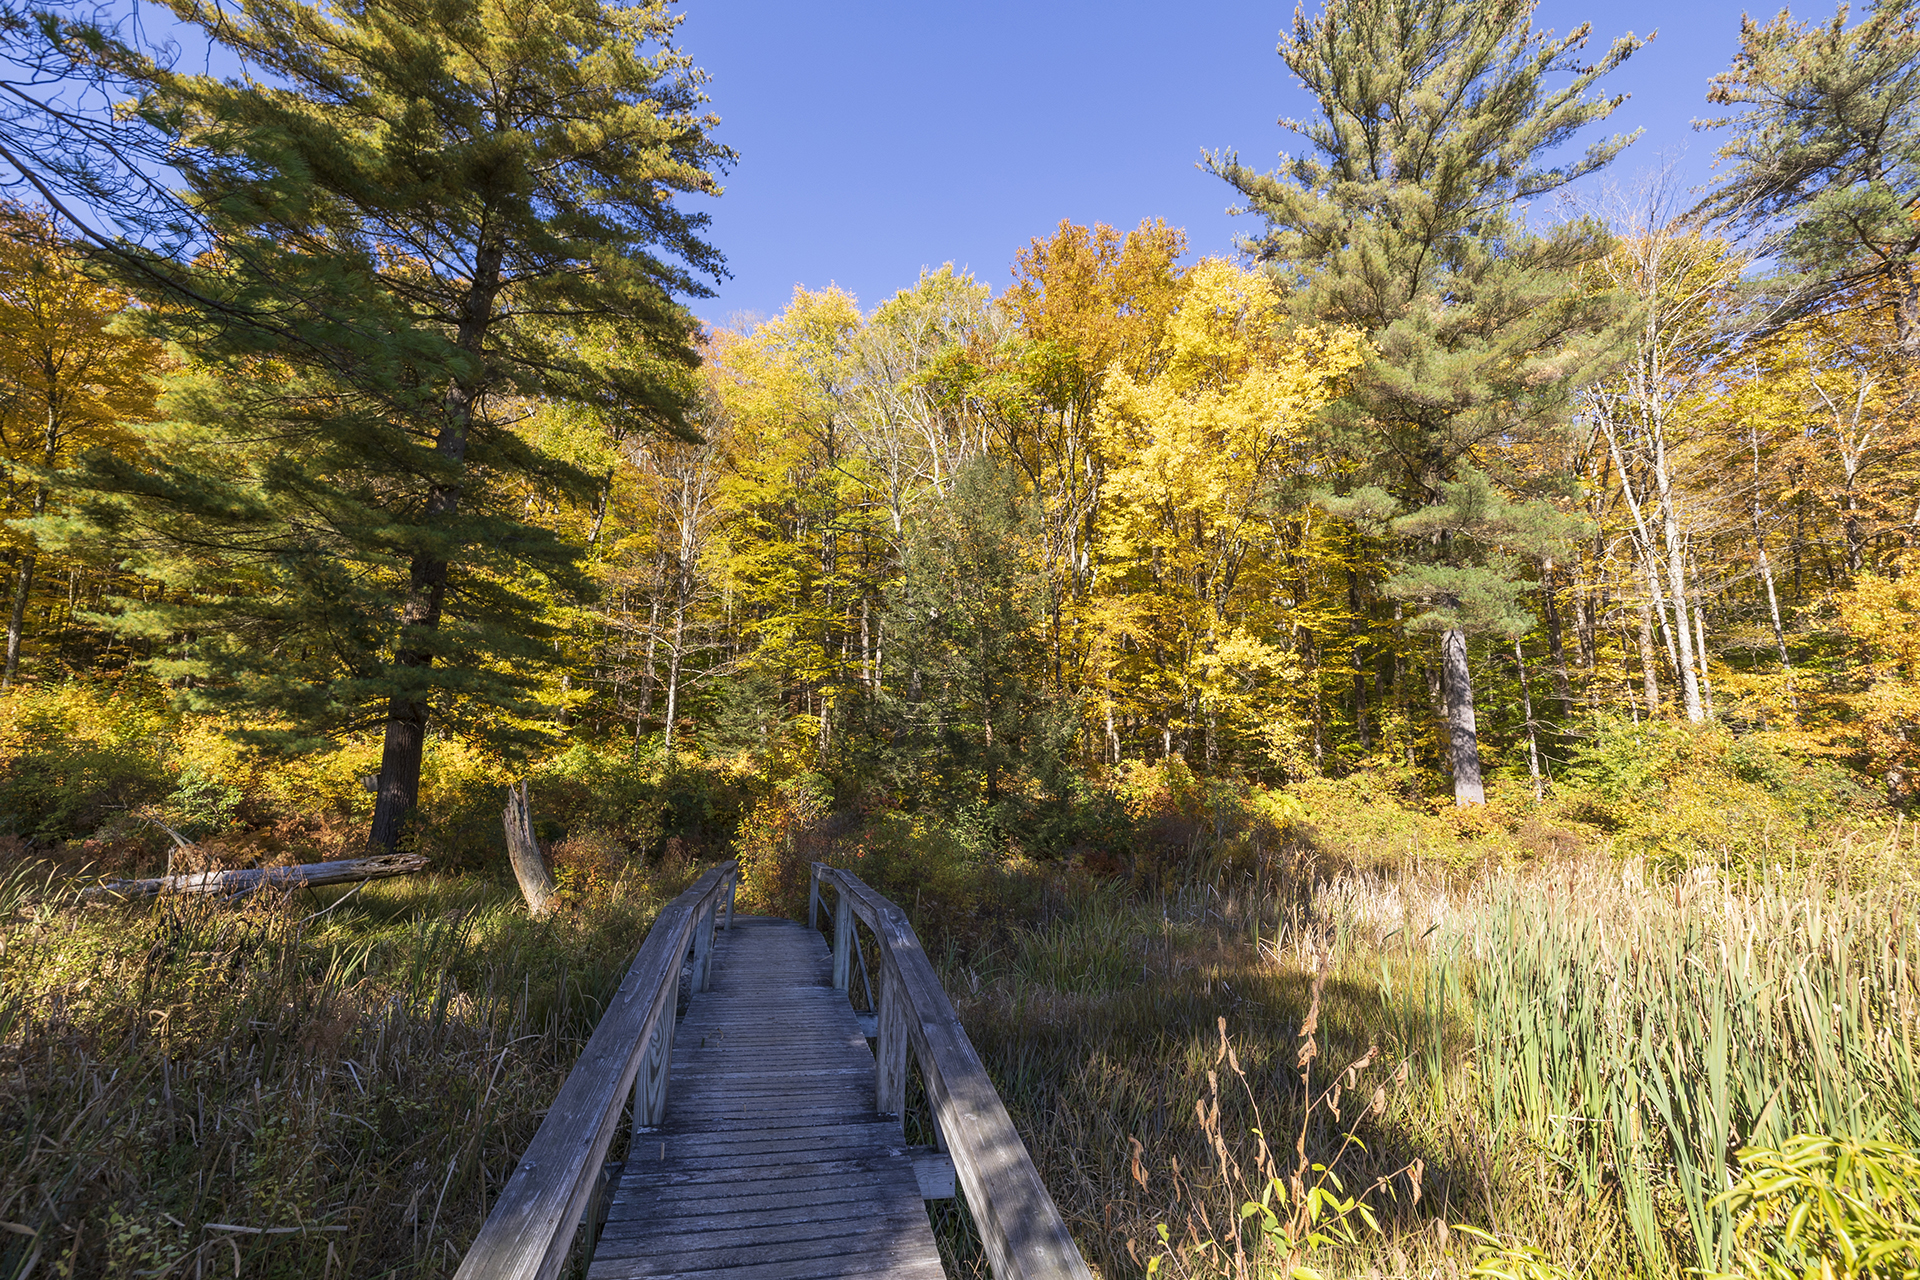 Wooden boardwalk through a fall forest and green pine.